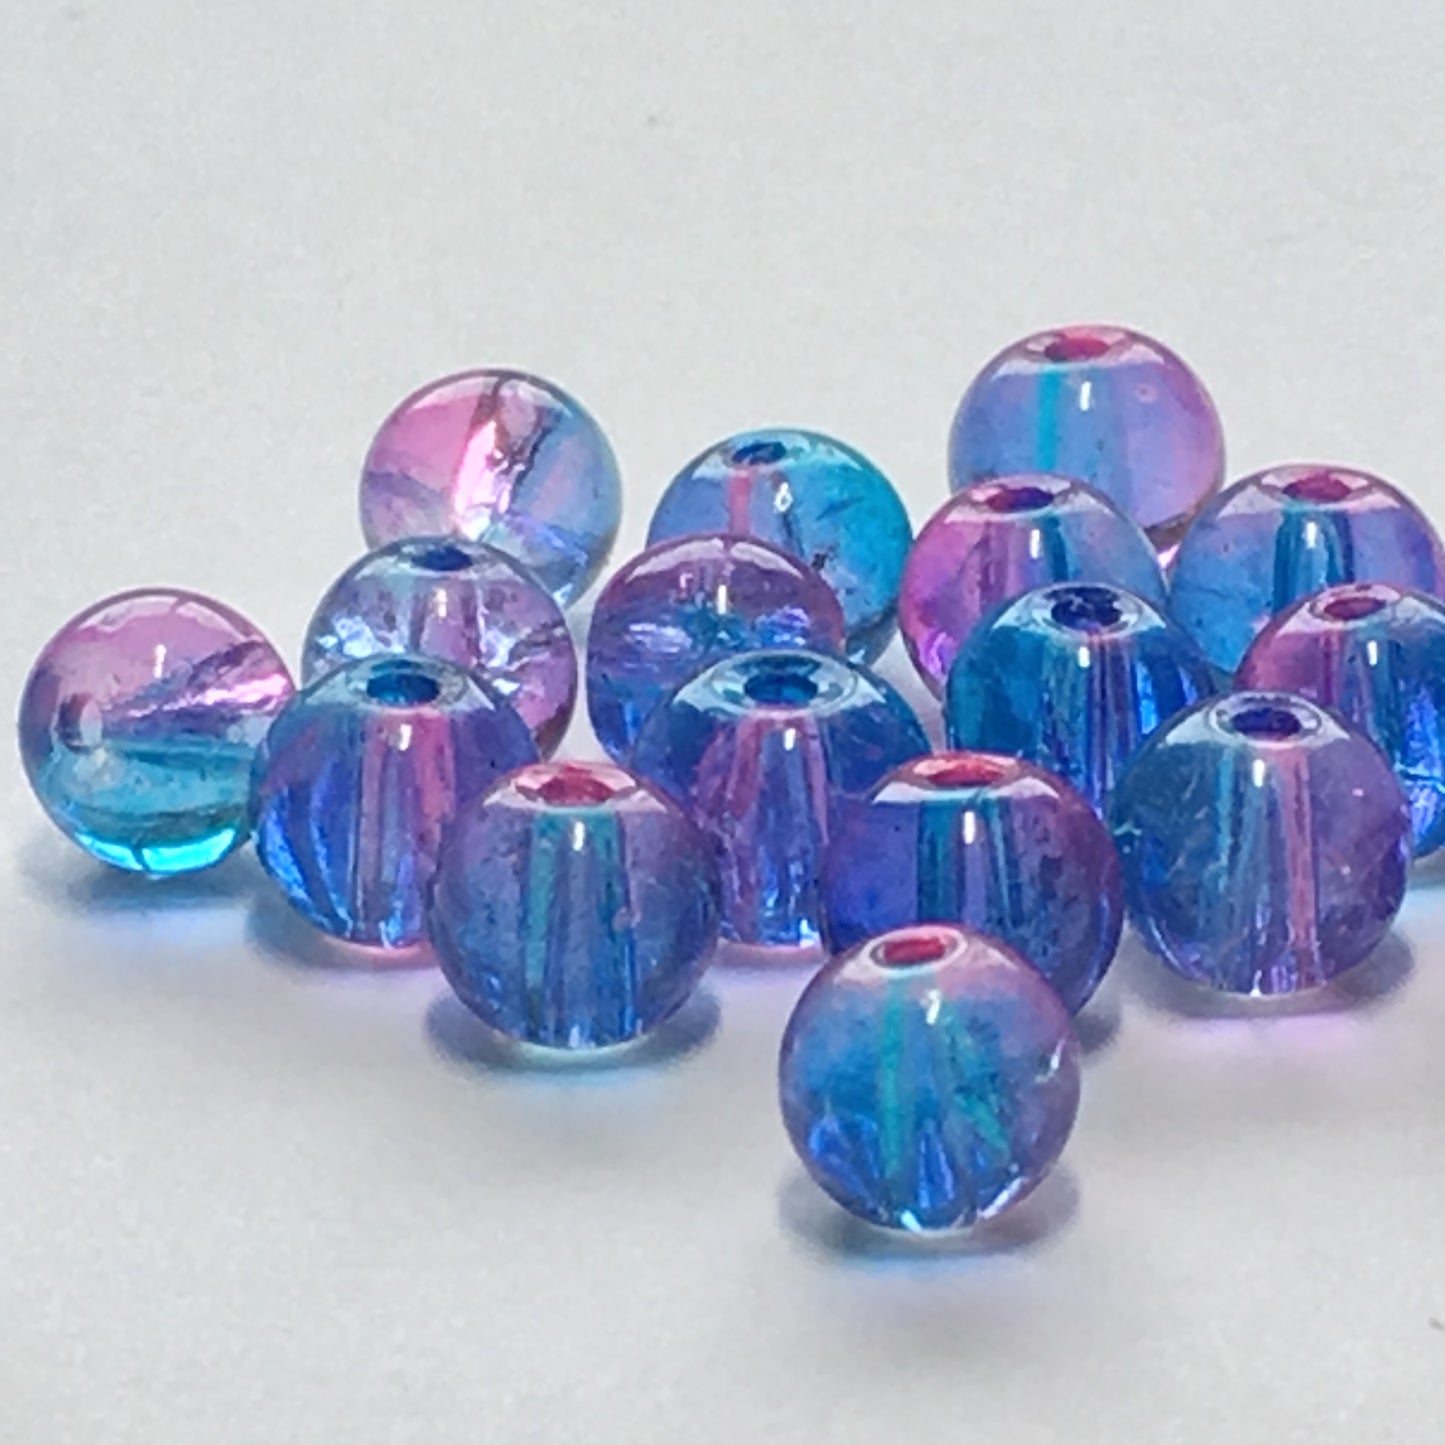 Transparent Two-Tone Pink and Blue Glass Round Beads, 6 mm, 20 Beads